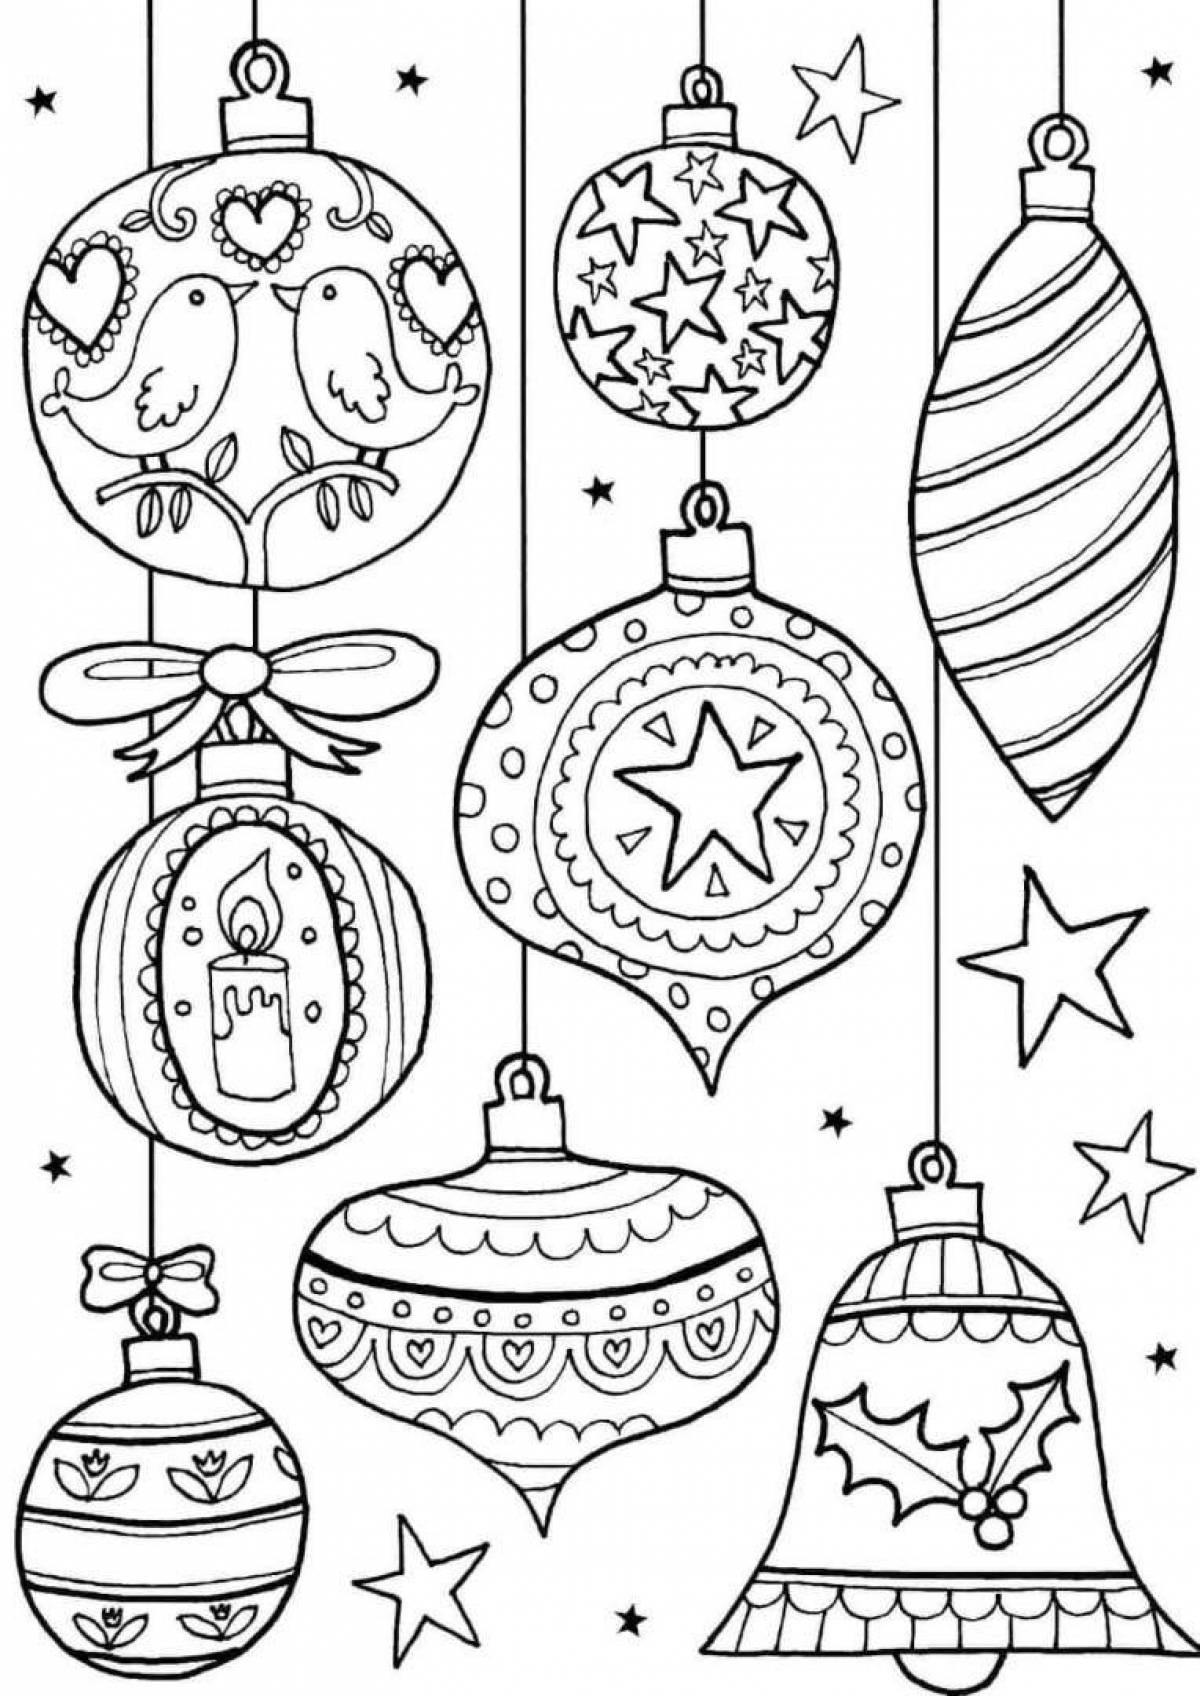 Colorful Christmas decorations for 5-6 year olds